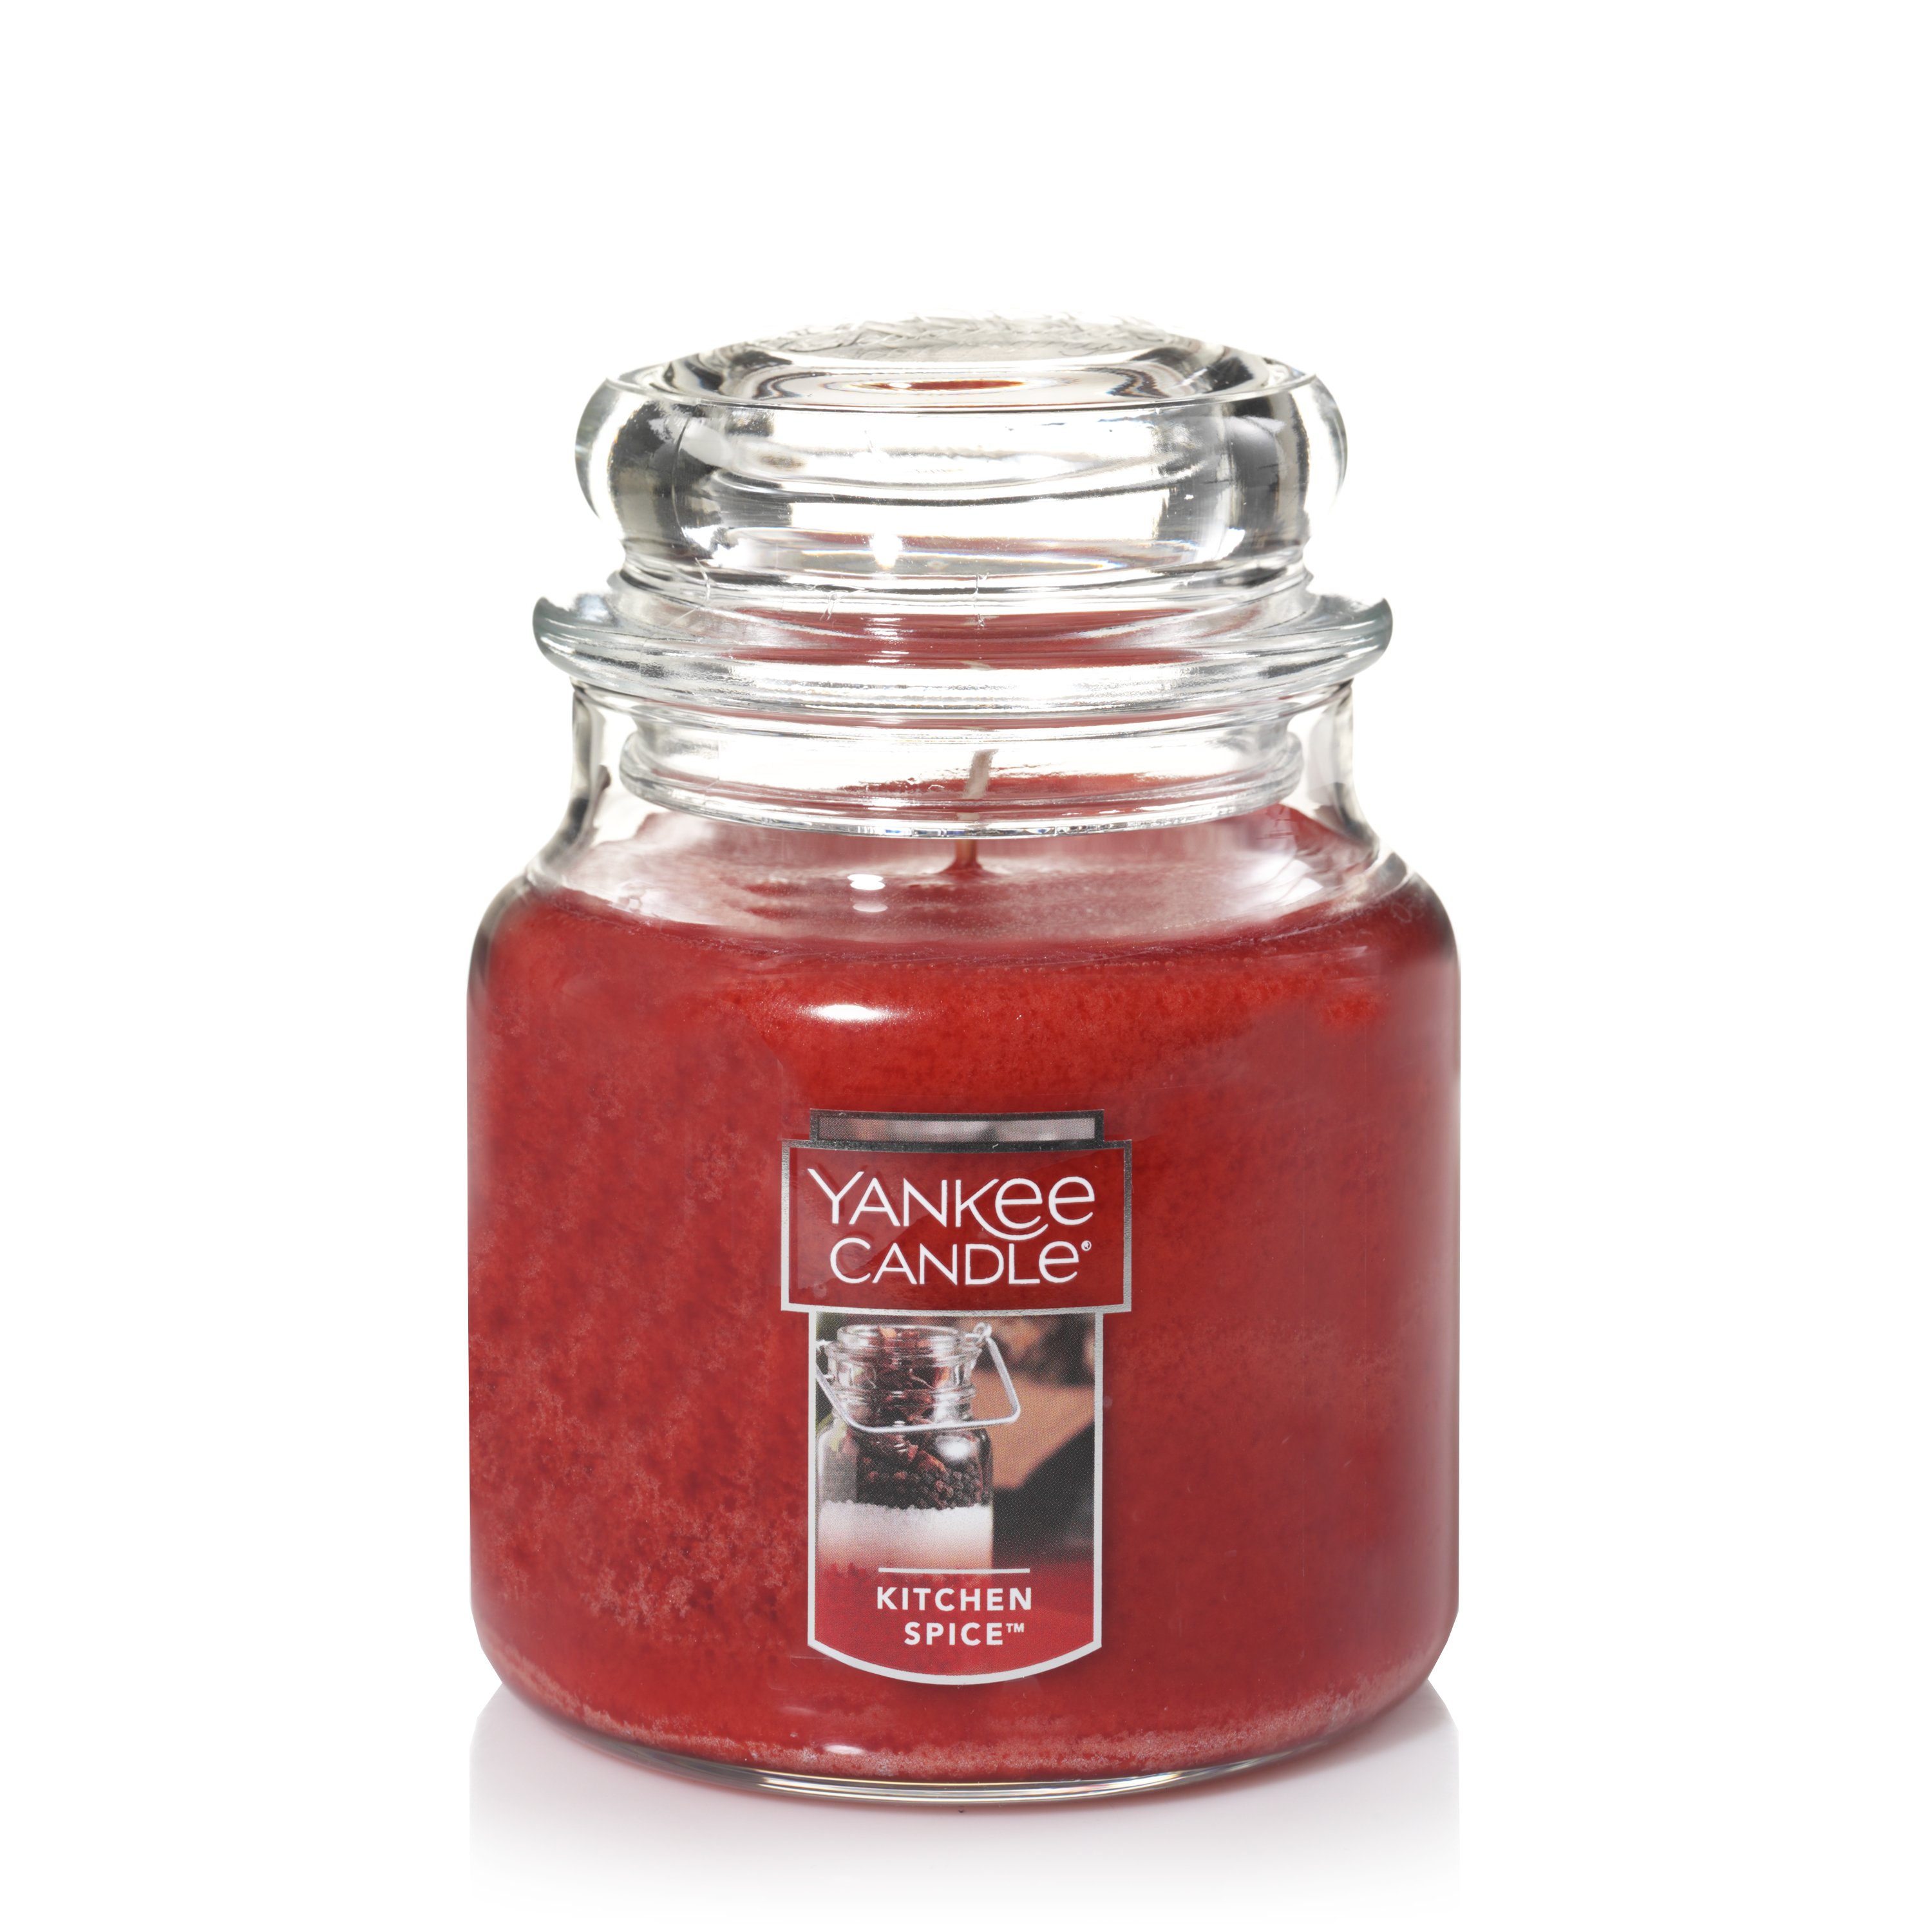 Yankee Candles so yummy you'll want to eat them — save up to 50